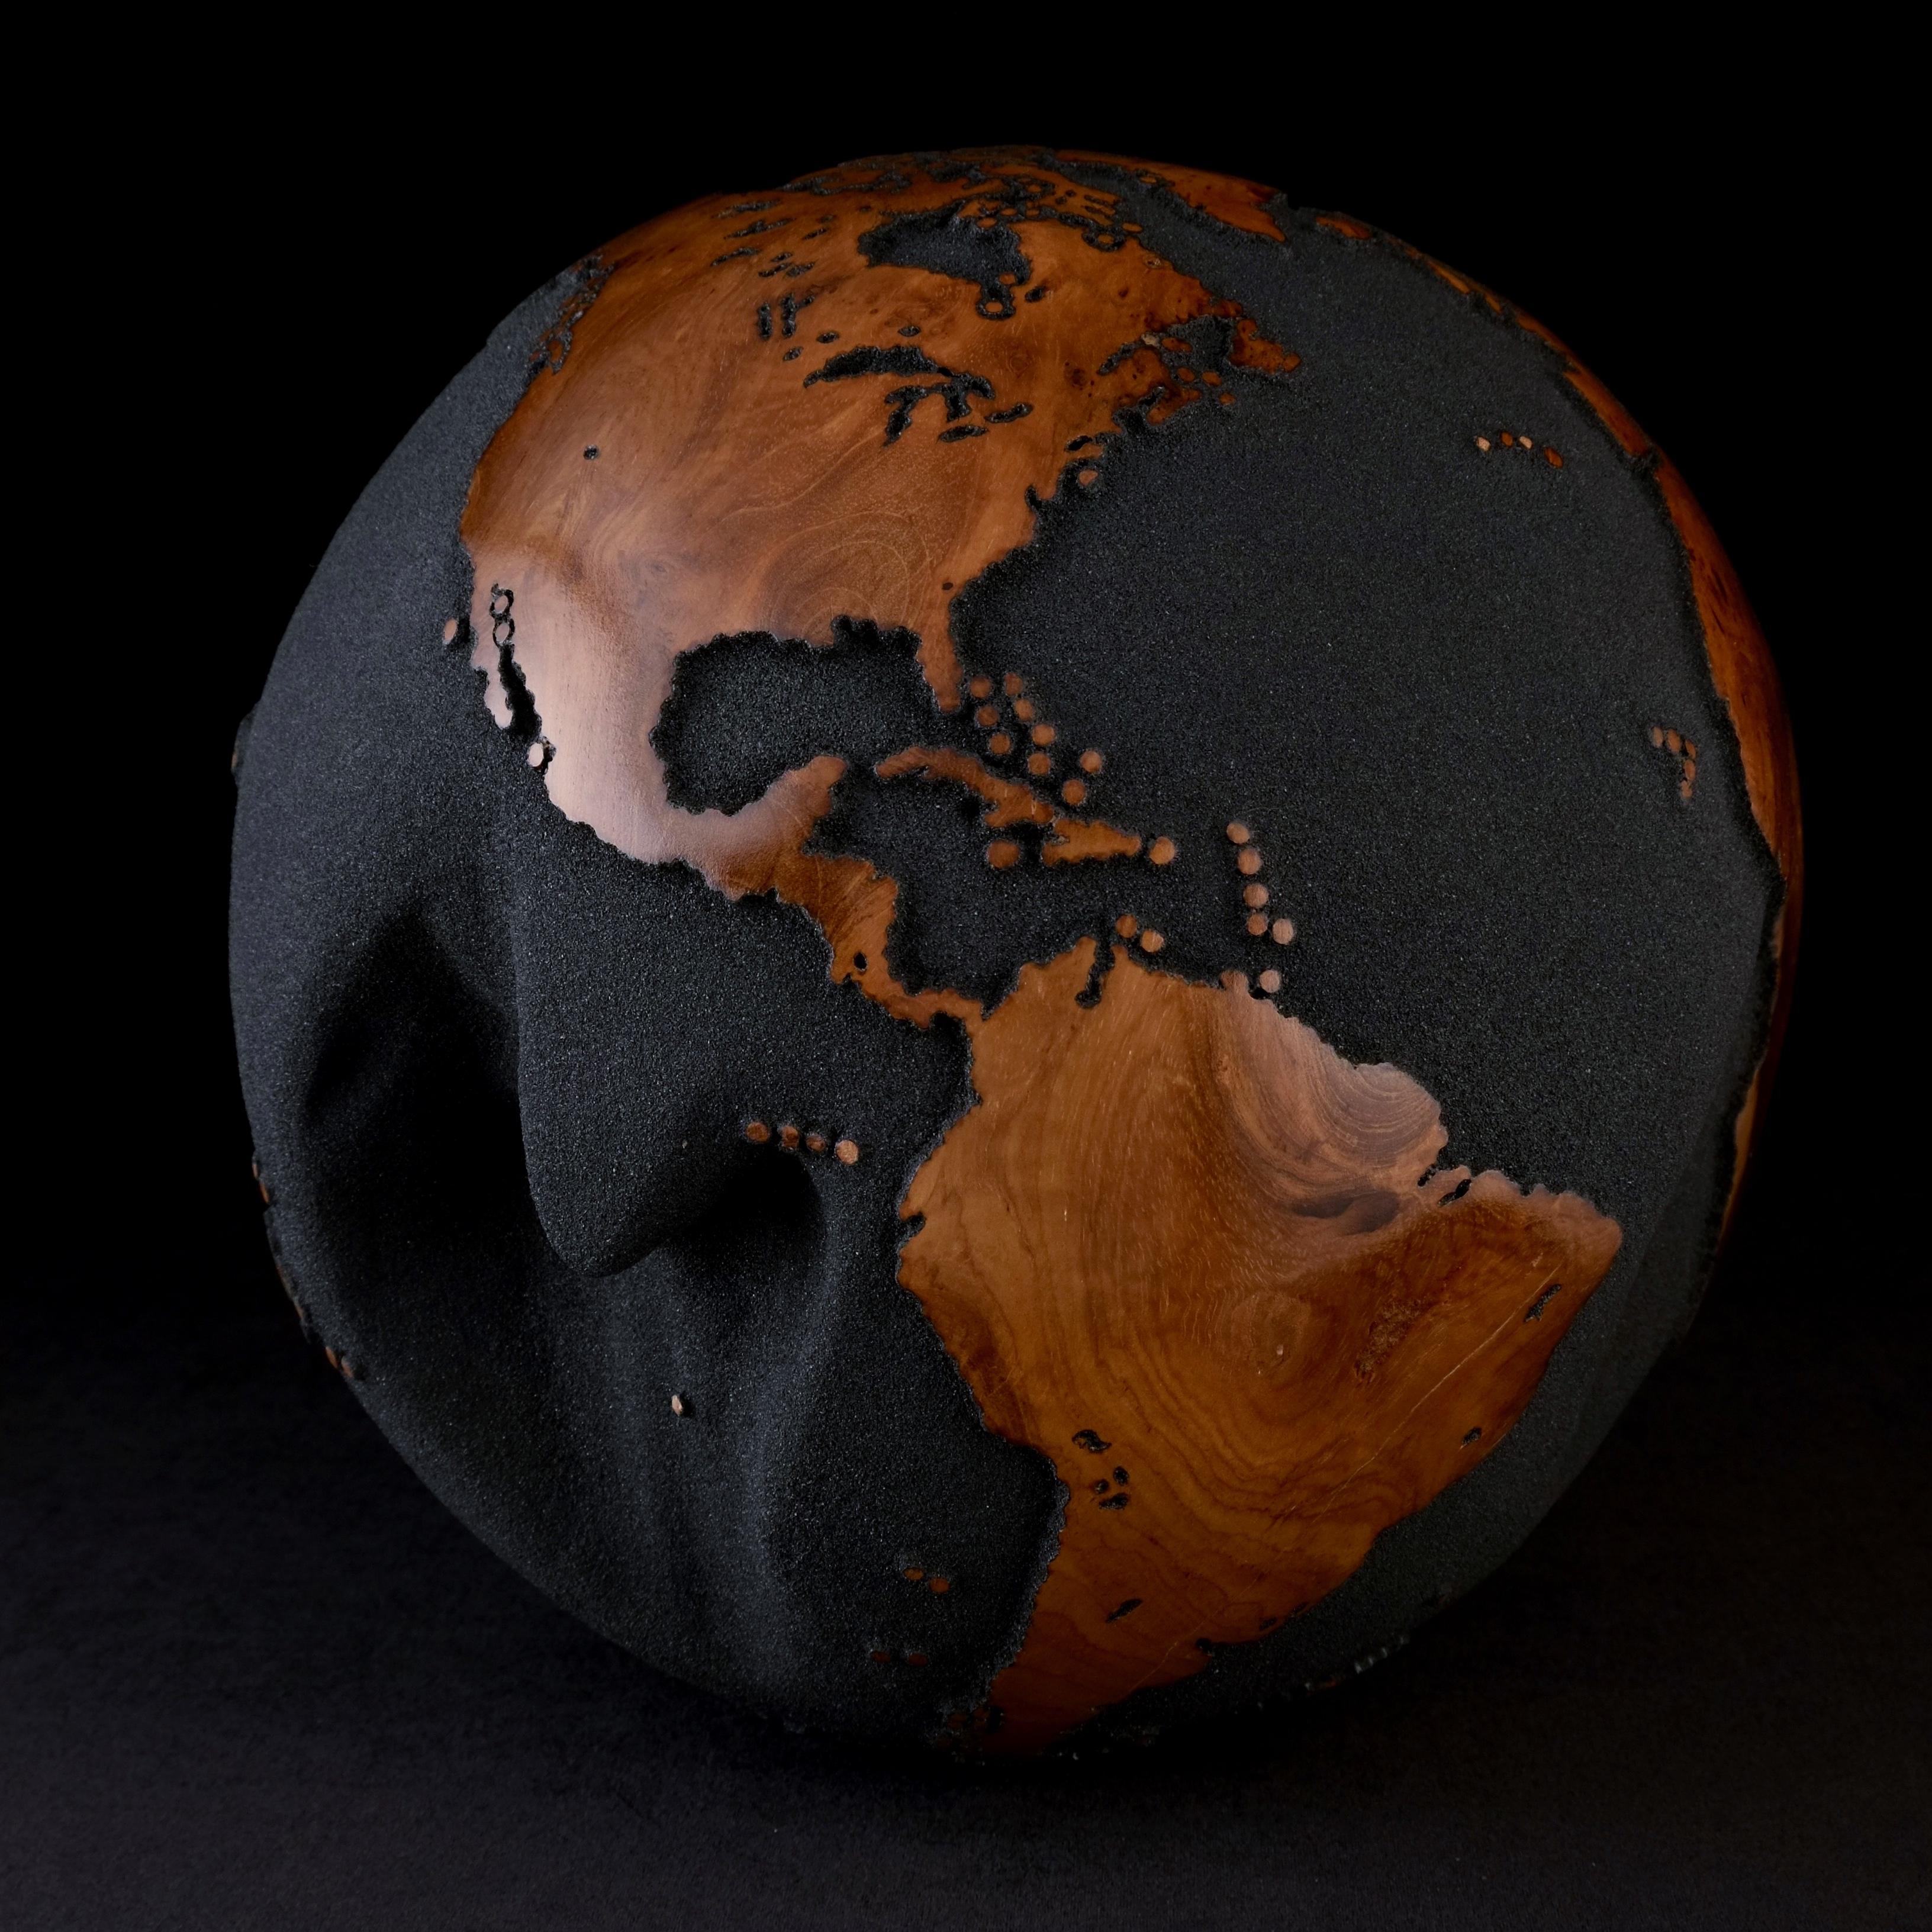 Teakwood and black lava sand make this beautiful turning globe a real stunning sculpture.
Made from a whole piece of wood the way the sculpture is shaped is defined by how the tree grew.
Sitting on a turning base the sculpture can spin silently